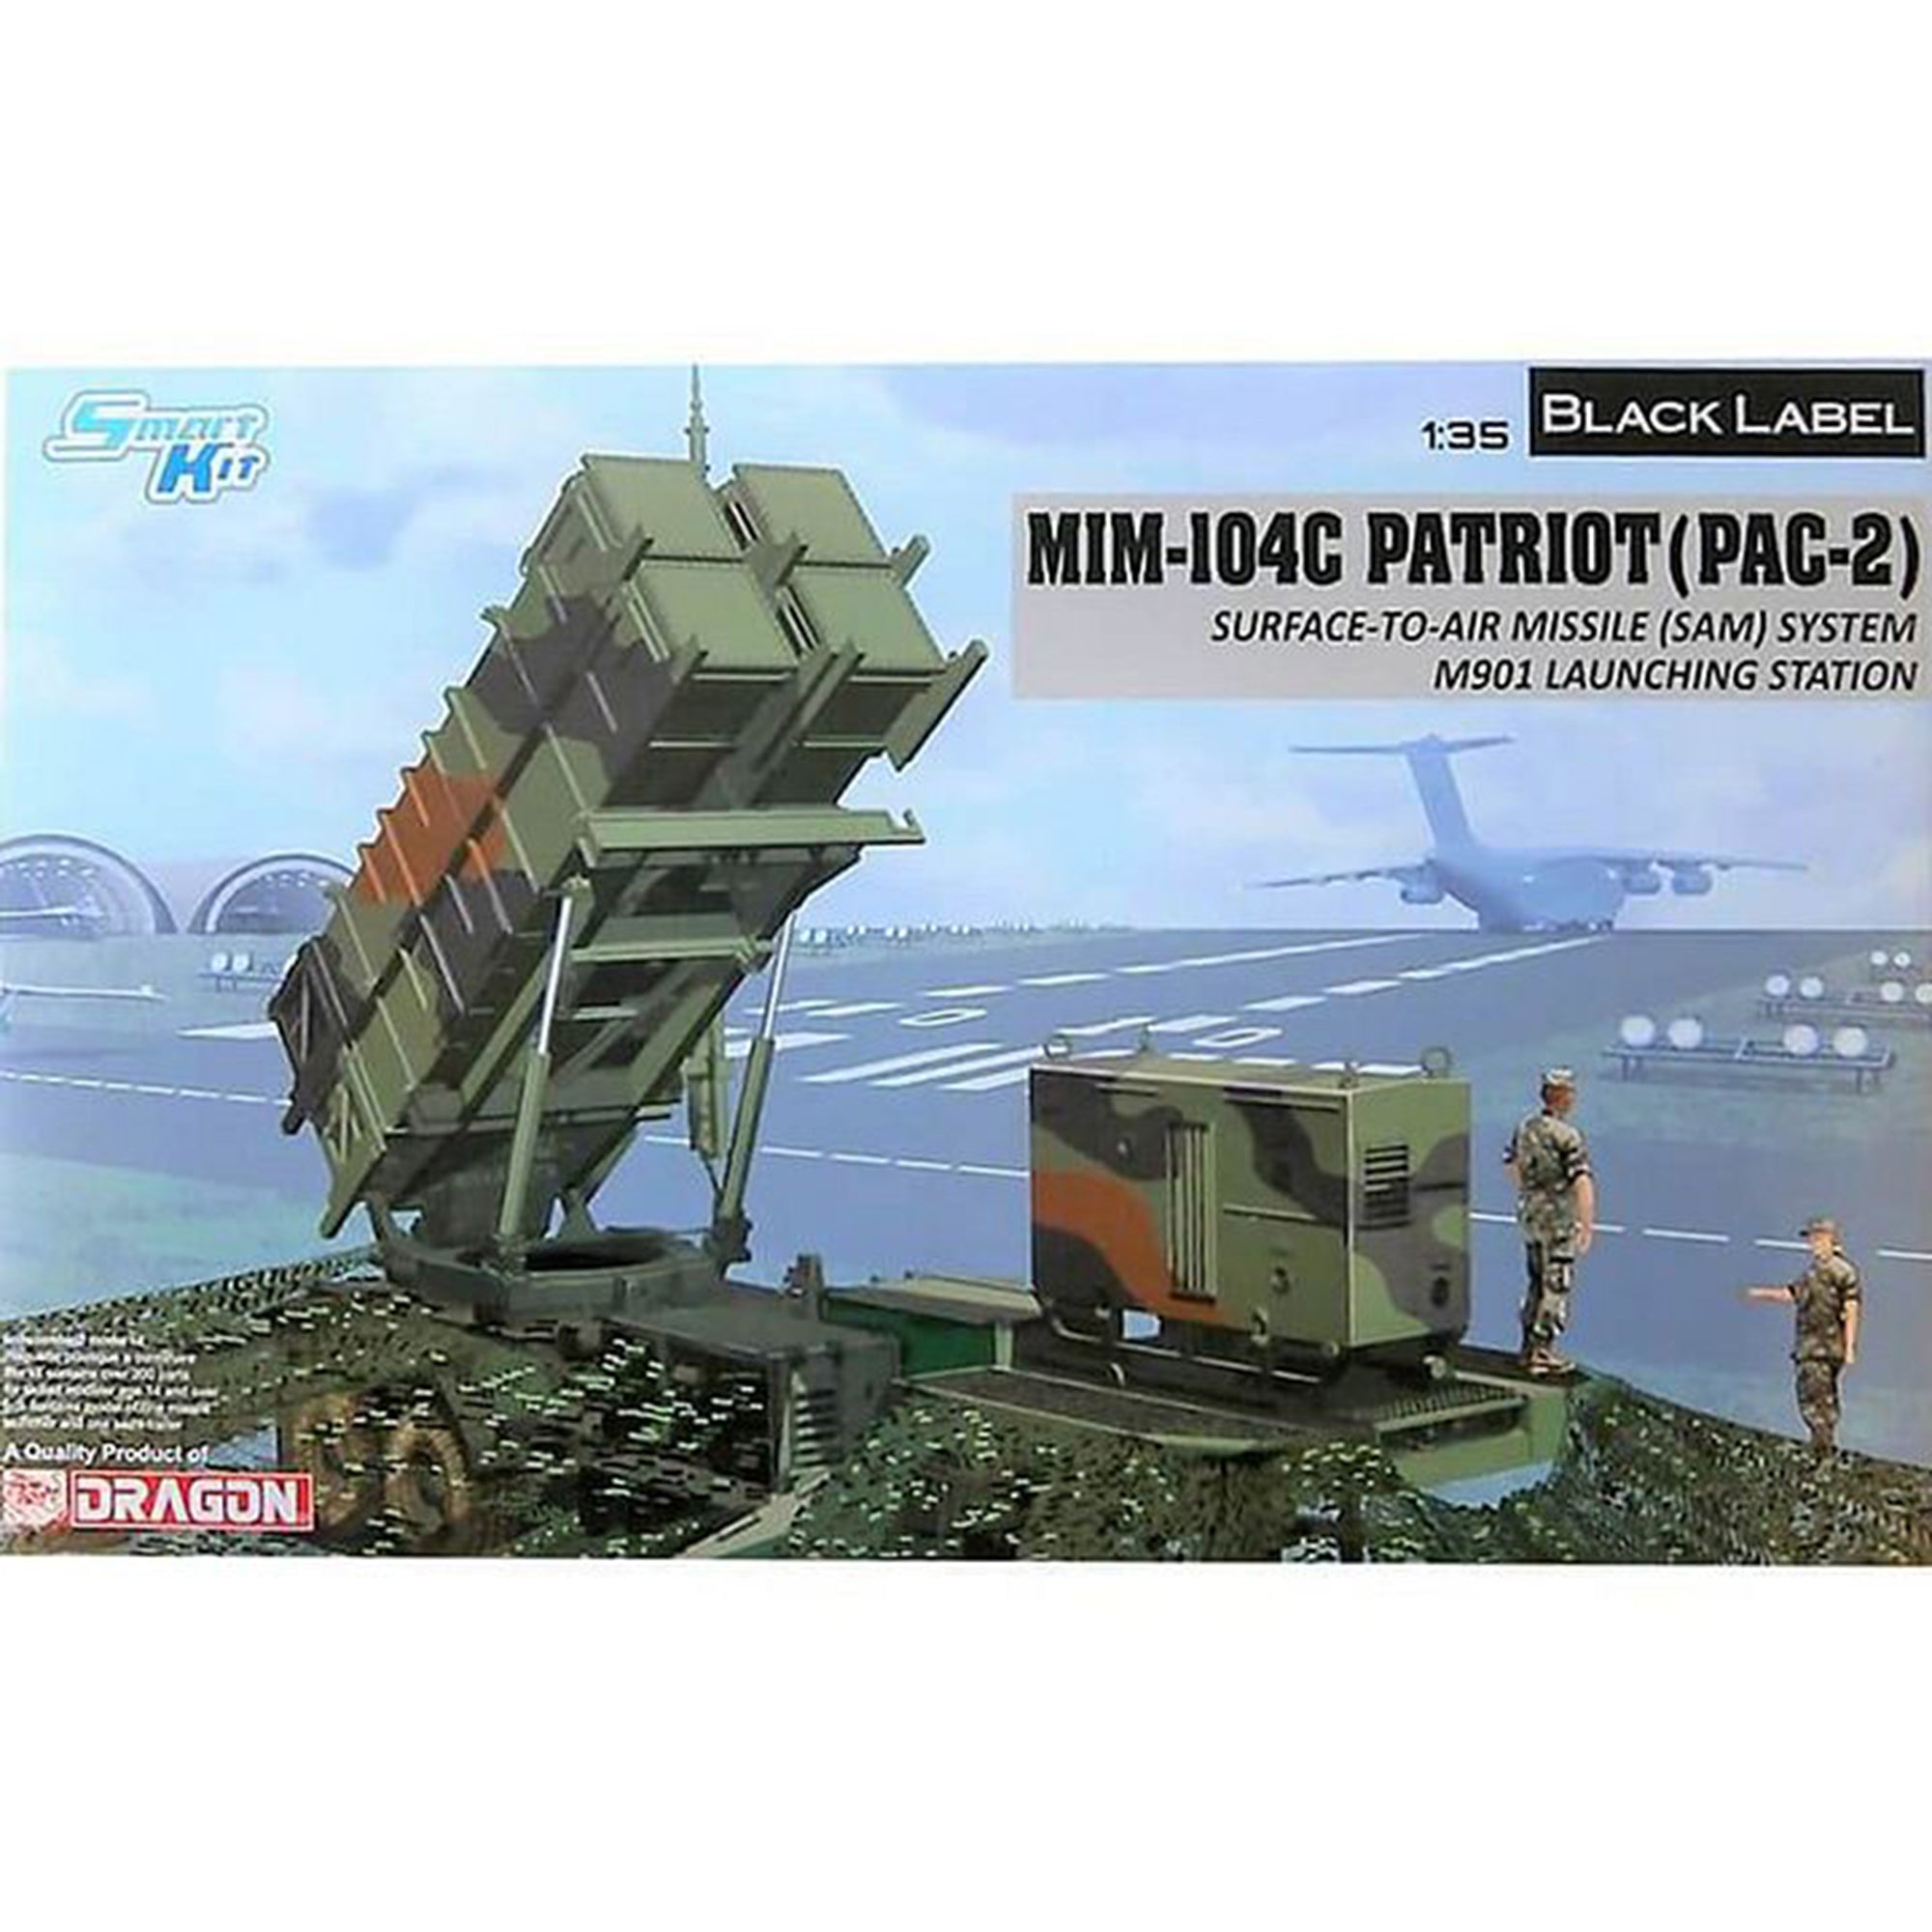 Dragon 3604 1/35 Black Label MIM-104C Patriot (PAC-2) Surface-to-Air Missile (SAM) System M901 Launching Station Model Kit